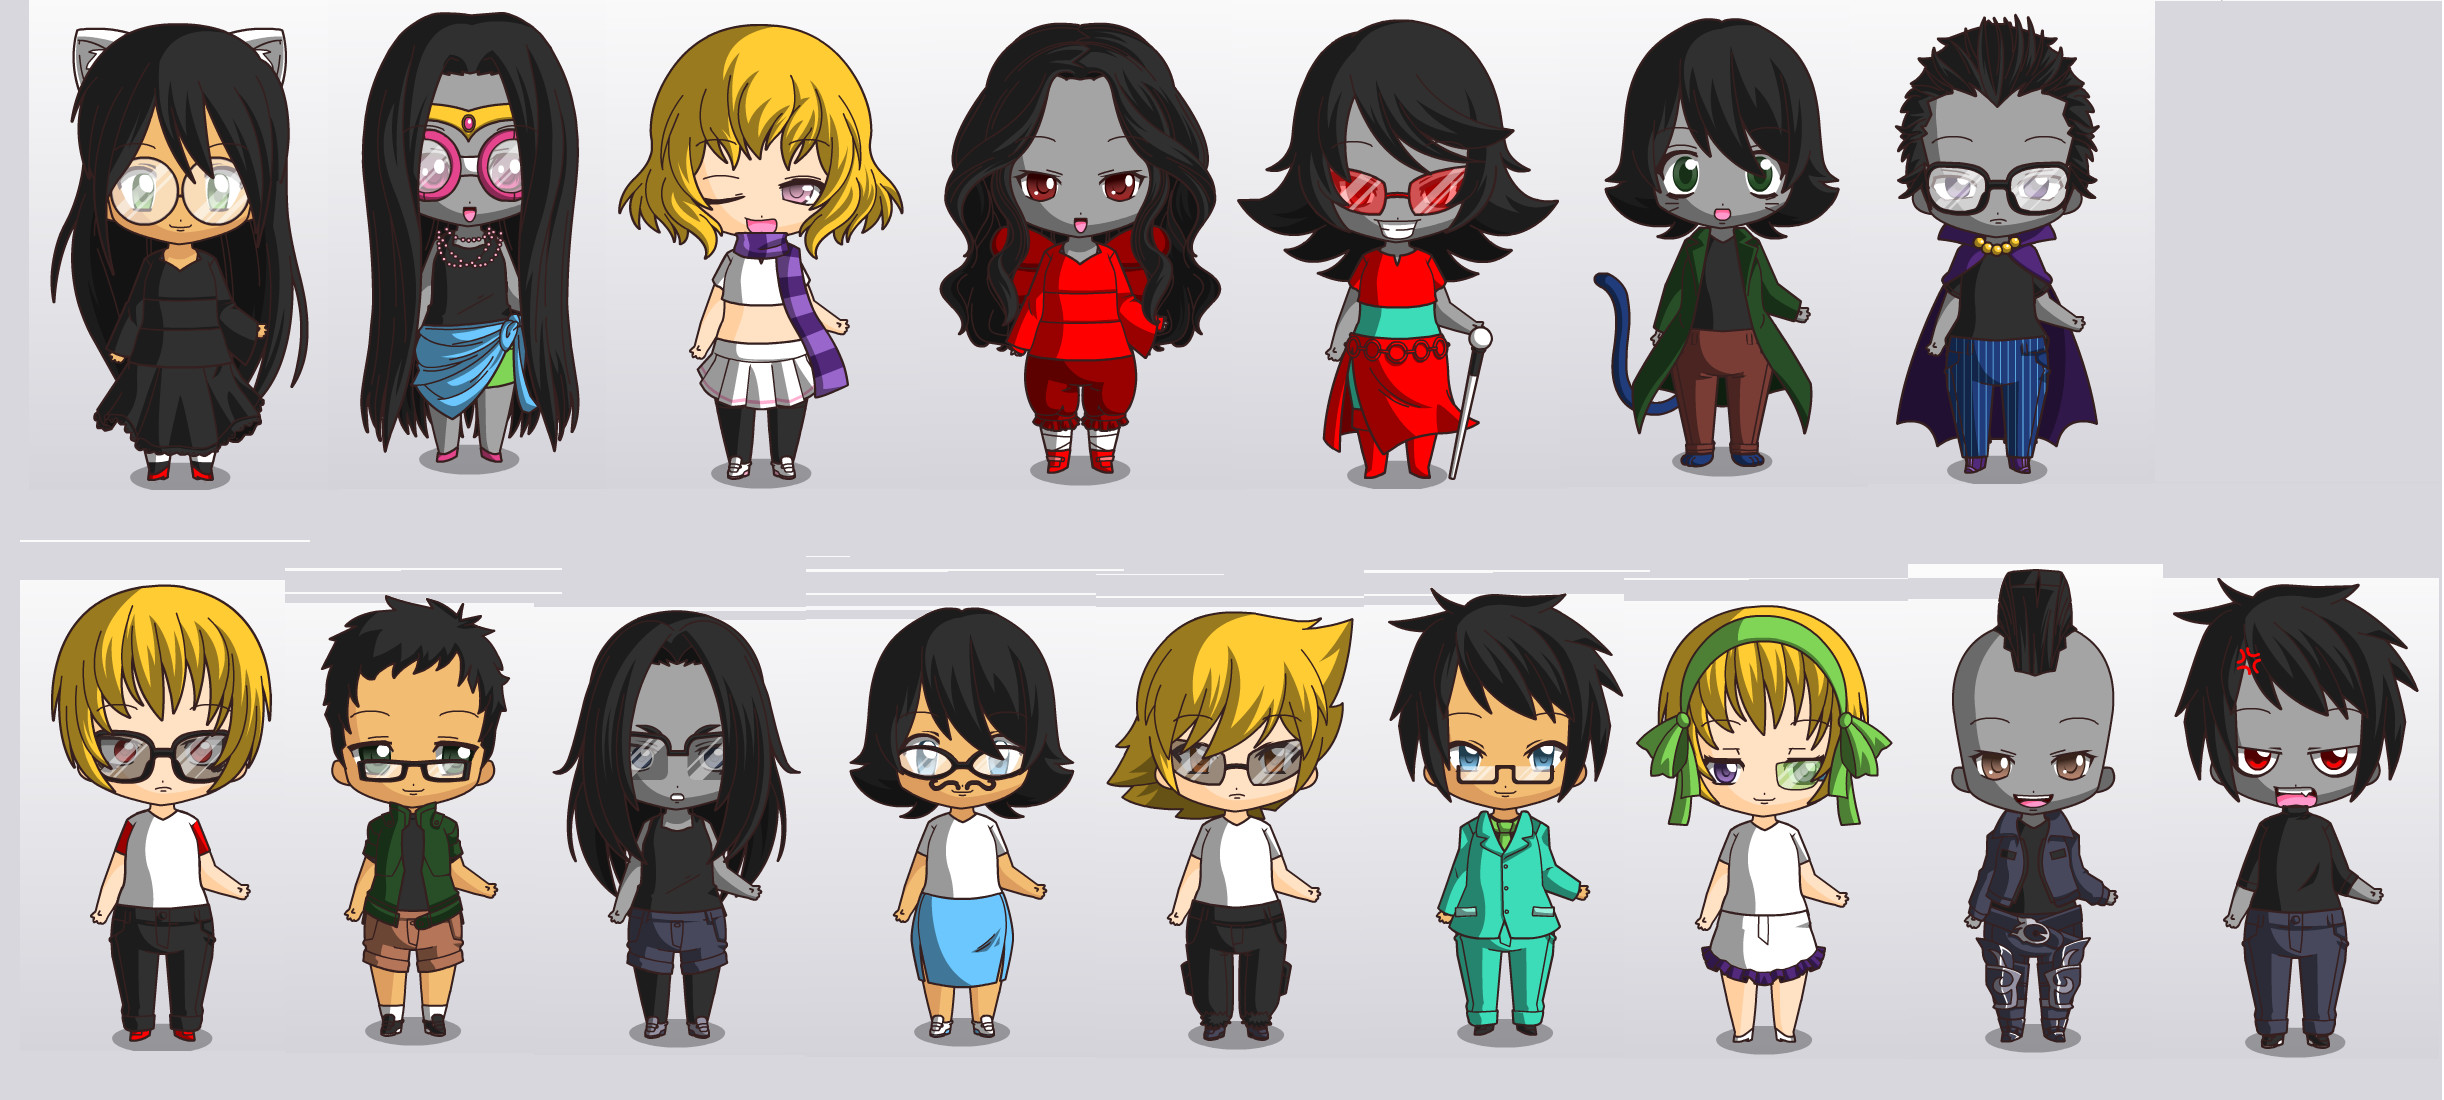 2444x1100 I made these at doll divne, I had limited resources, so I could only do  some characters.HD Wallpaper and background photos of Homestucks I could  make in ...